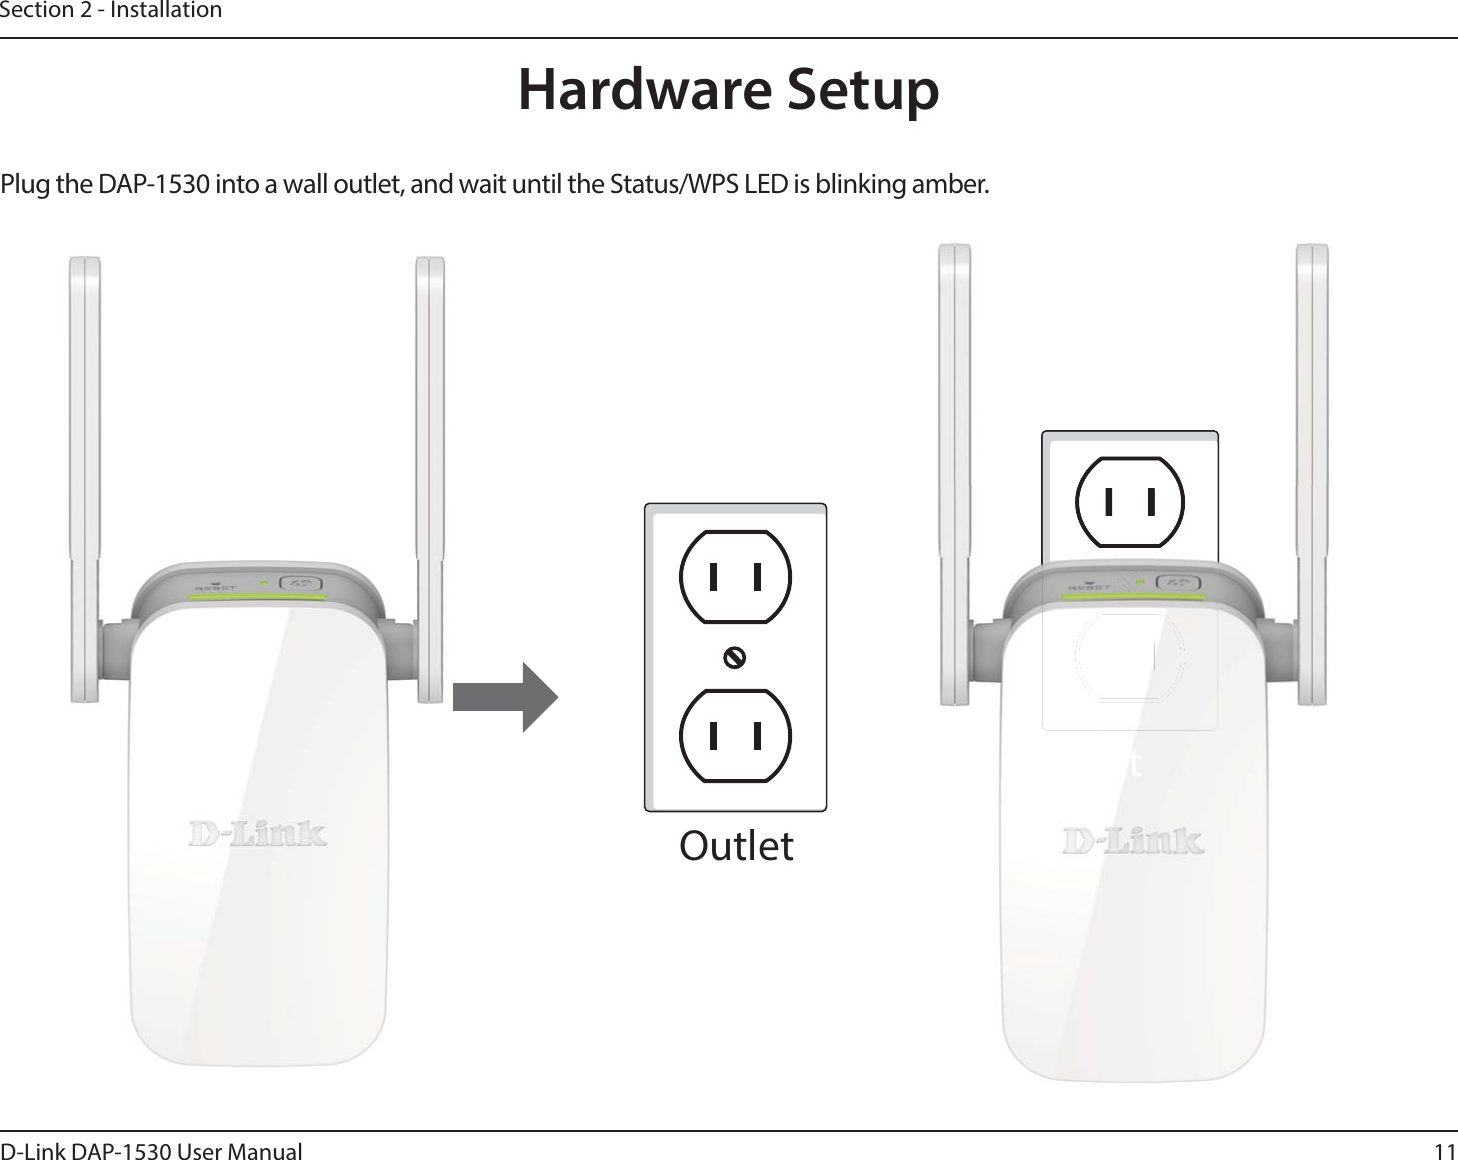 11D-Link DAP-1530 User ManualSection 2 - InstallationPlug the DAP-1530 into a wall outlet, and wait until the Status/WPS LED is blinking amber. OutletOutletHardware SetupOutlet